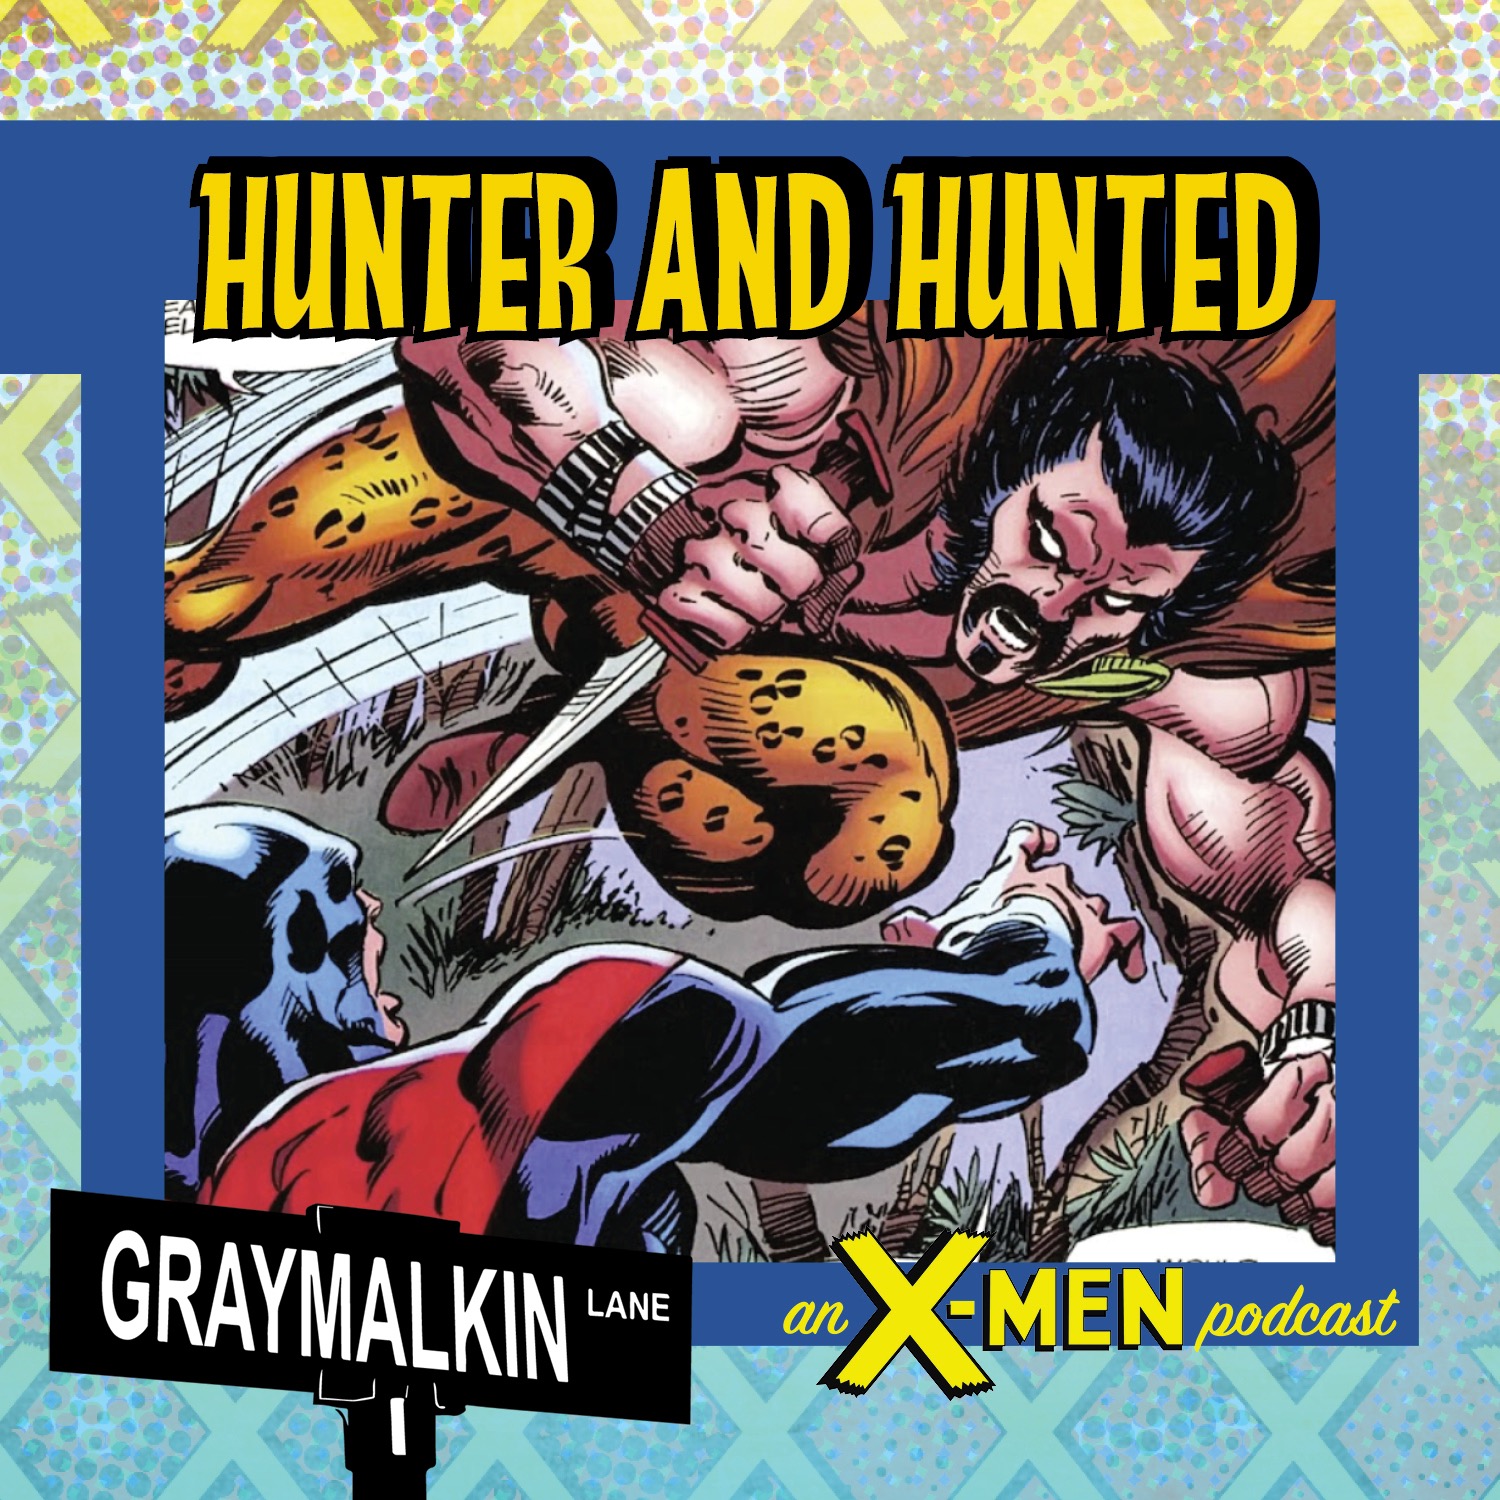 X-Men: the Hidden Years 17-18: Hunter and Hunted! Featuring Daniel Kibblesmith! And the Tomb of Ideas!